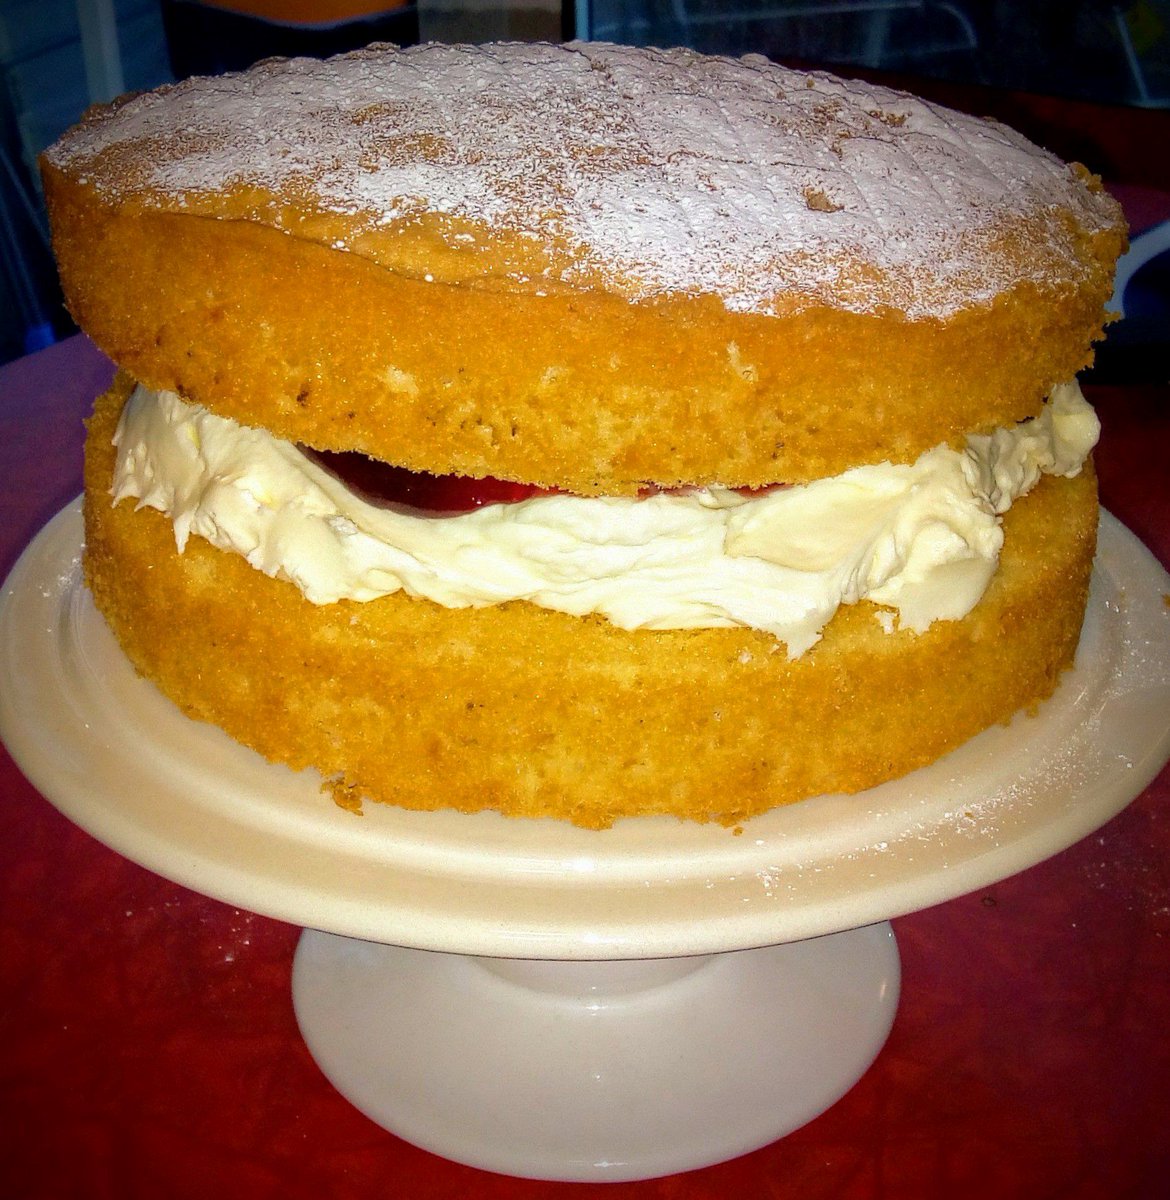 @ManMadeMoon I would happily provide a lovely homemade Victoria Sponge, this was demolished Sunday by my family who morphed into jackals.. #Britishfoodporn